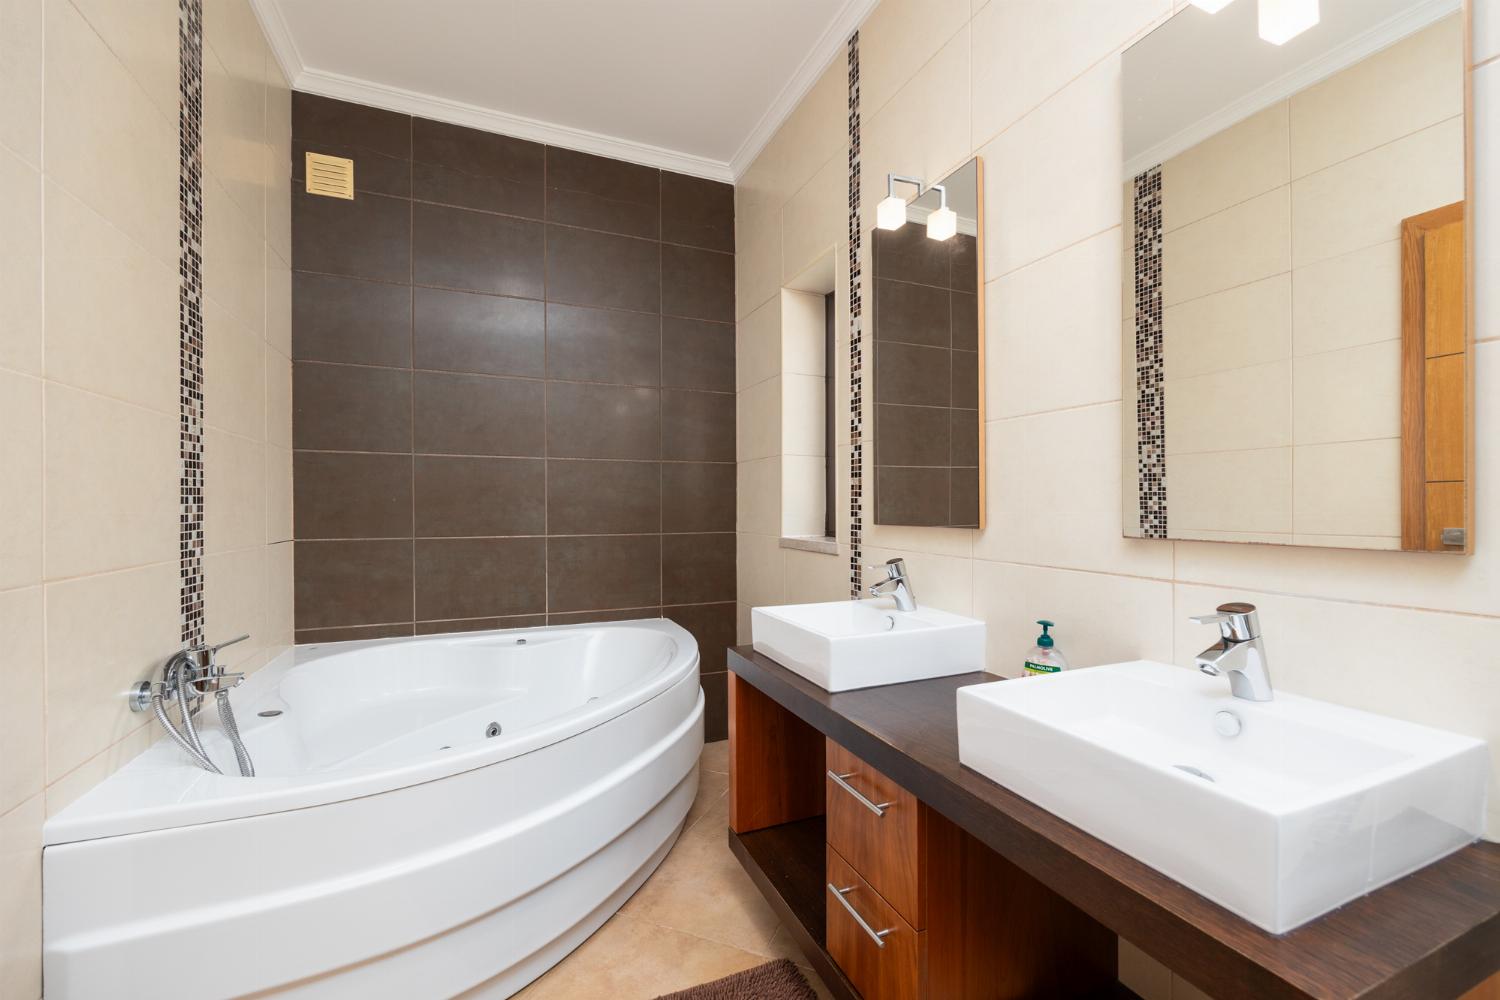 En suite bathroom with shower and jacuzzi